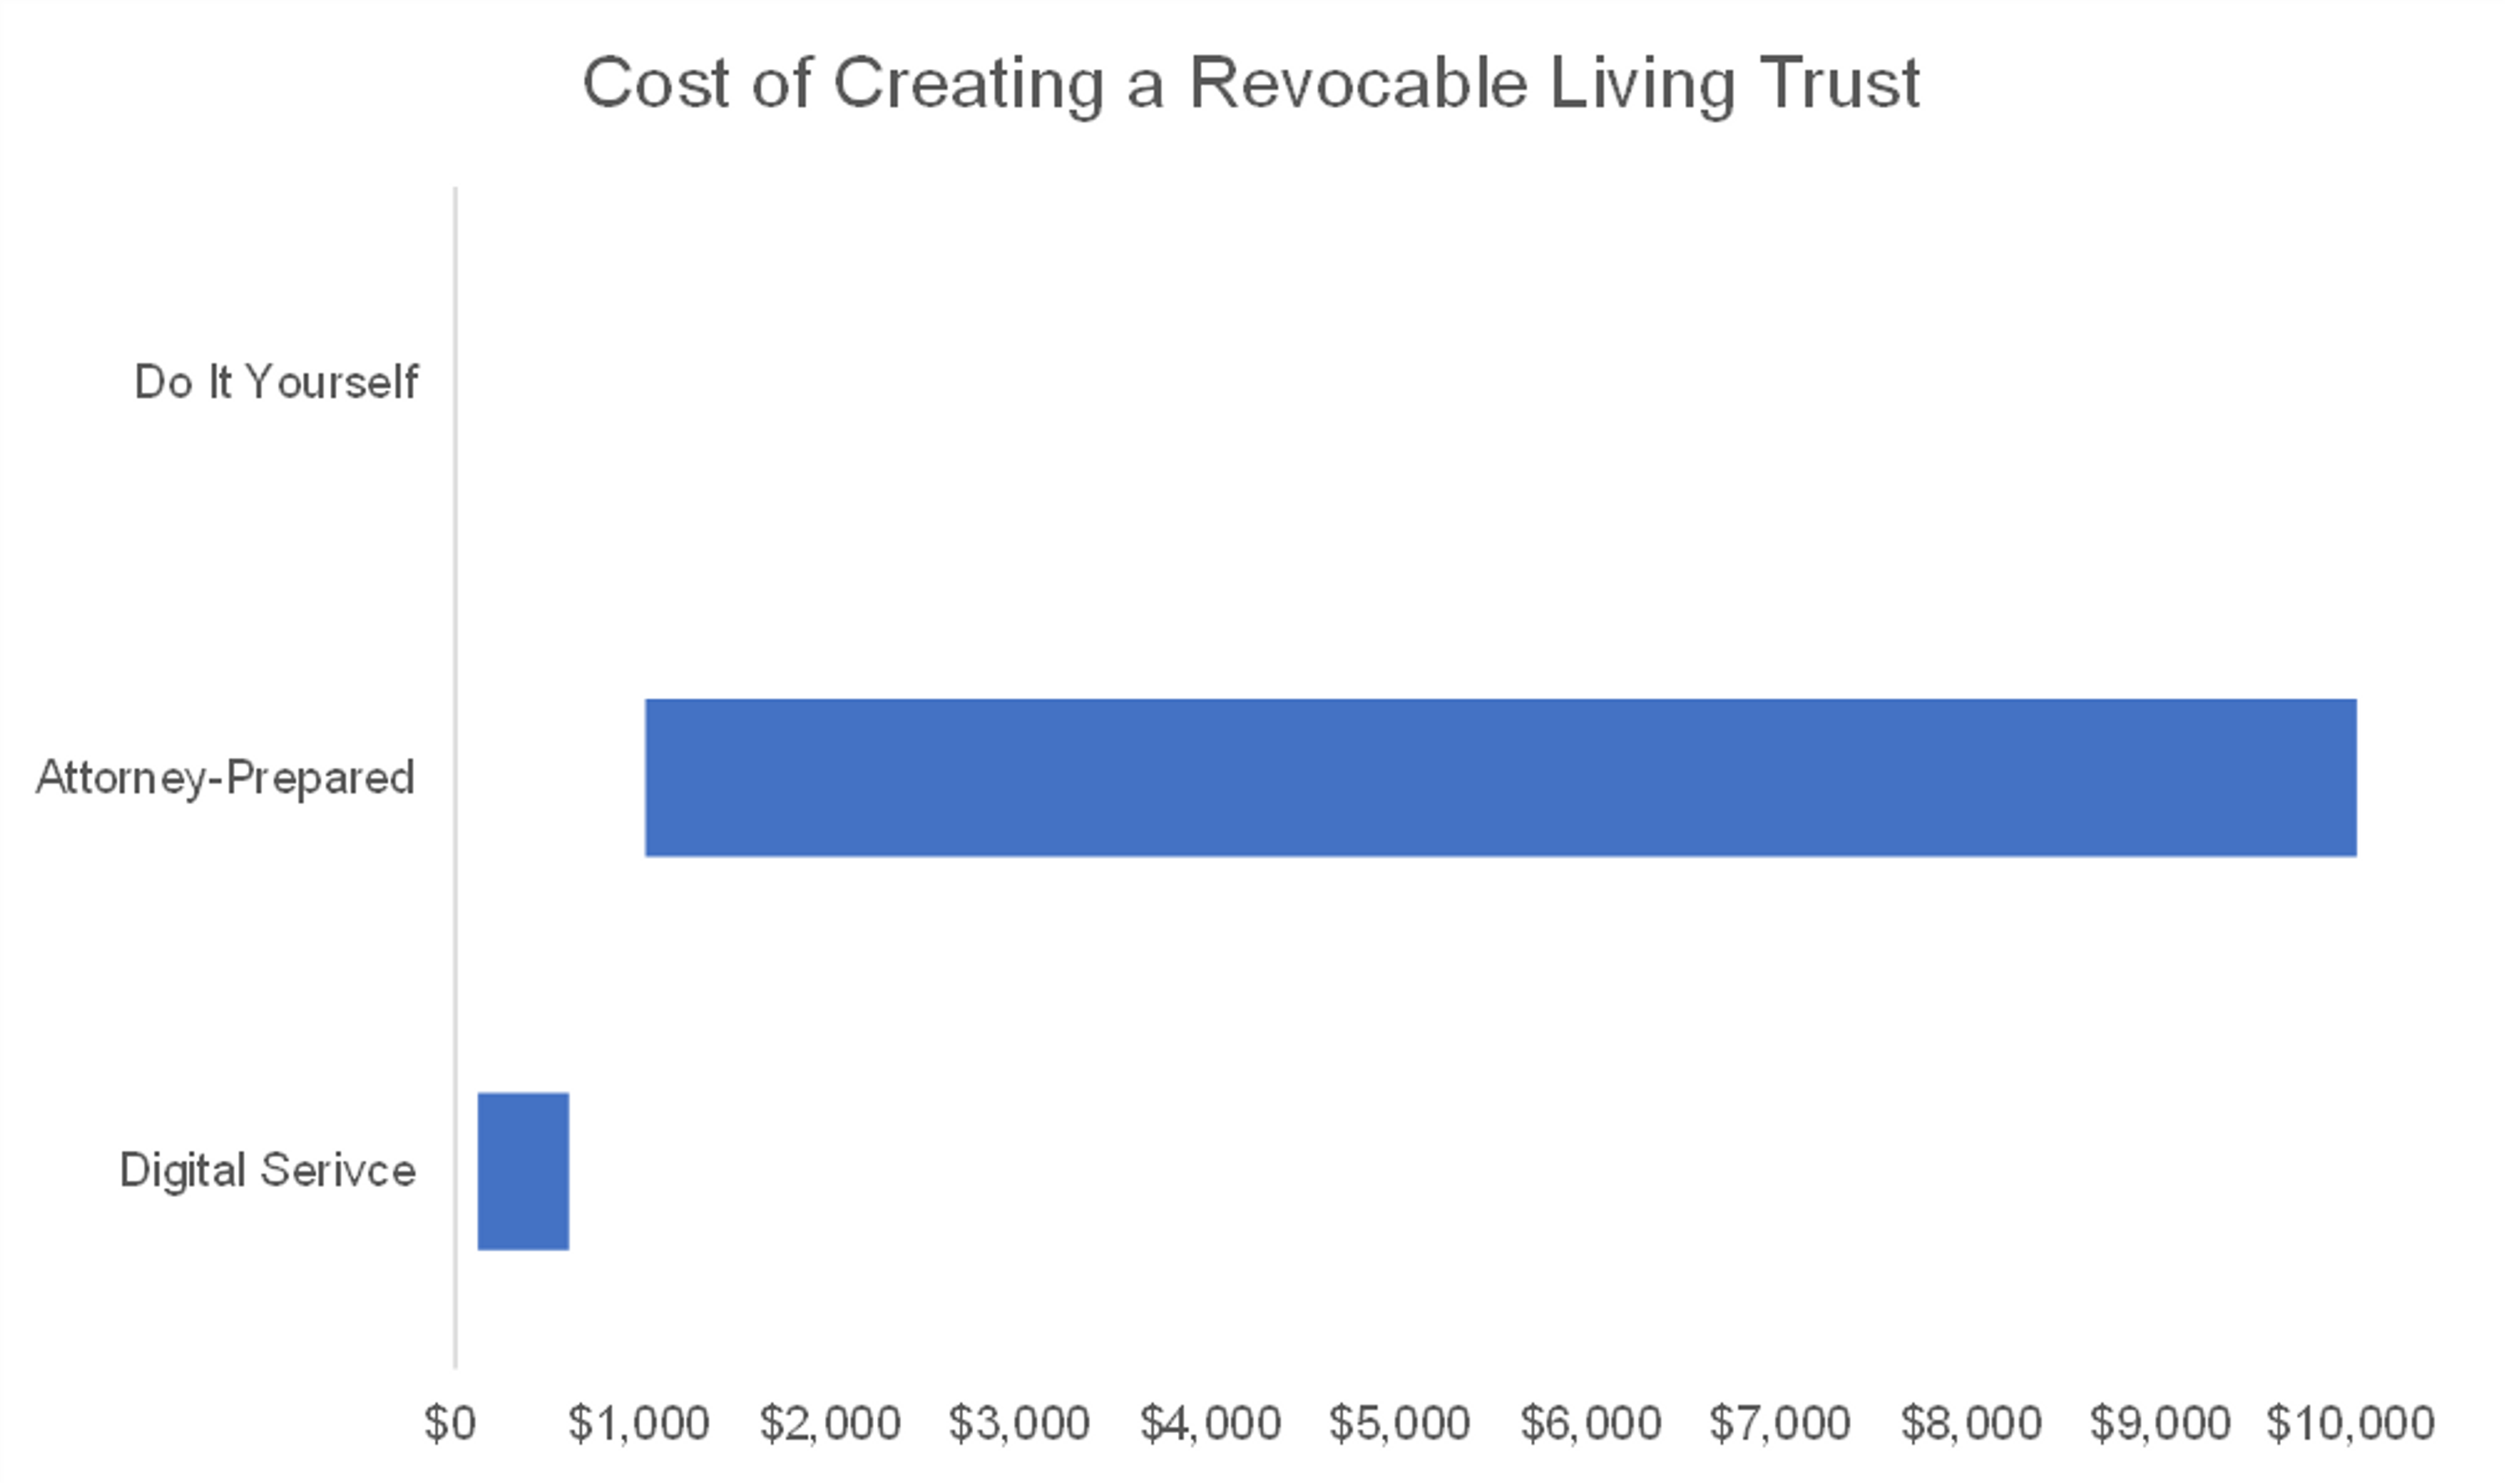 Bar graph showing cost to create a trust